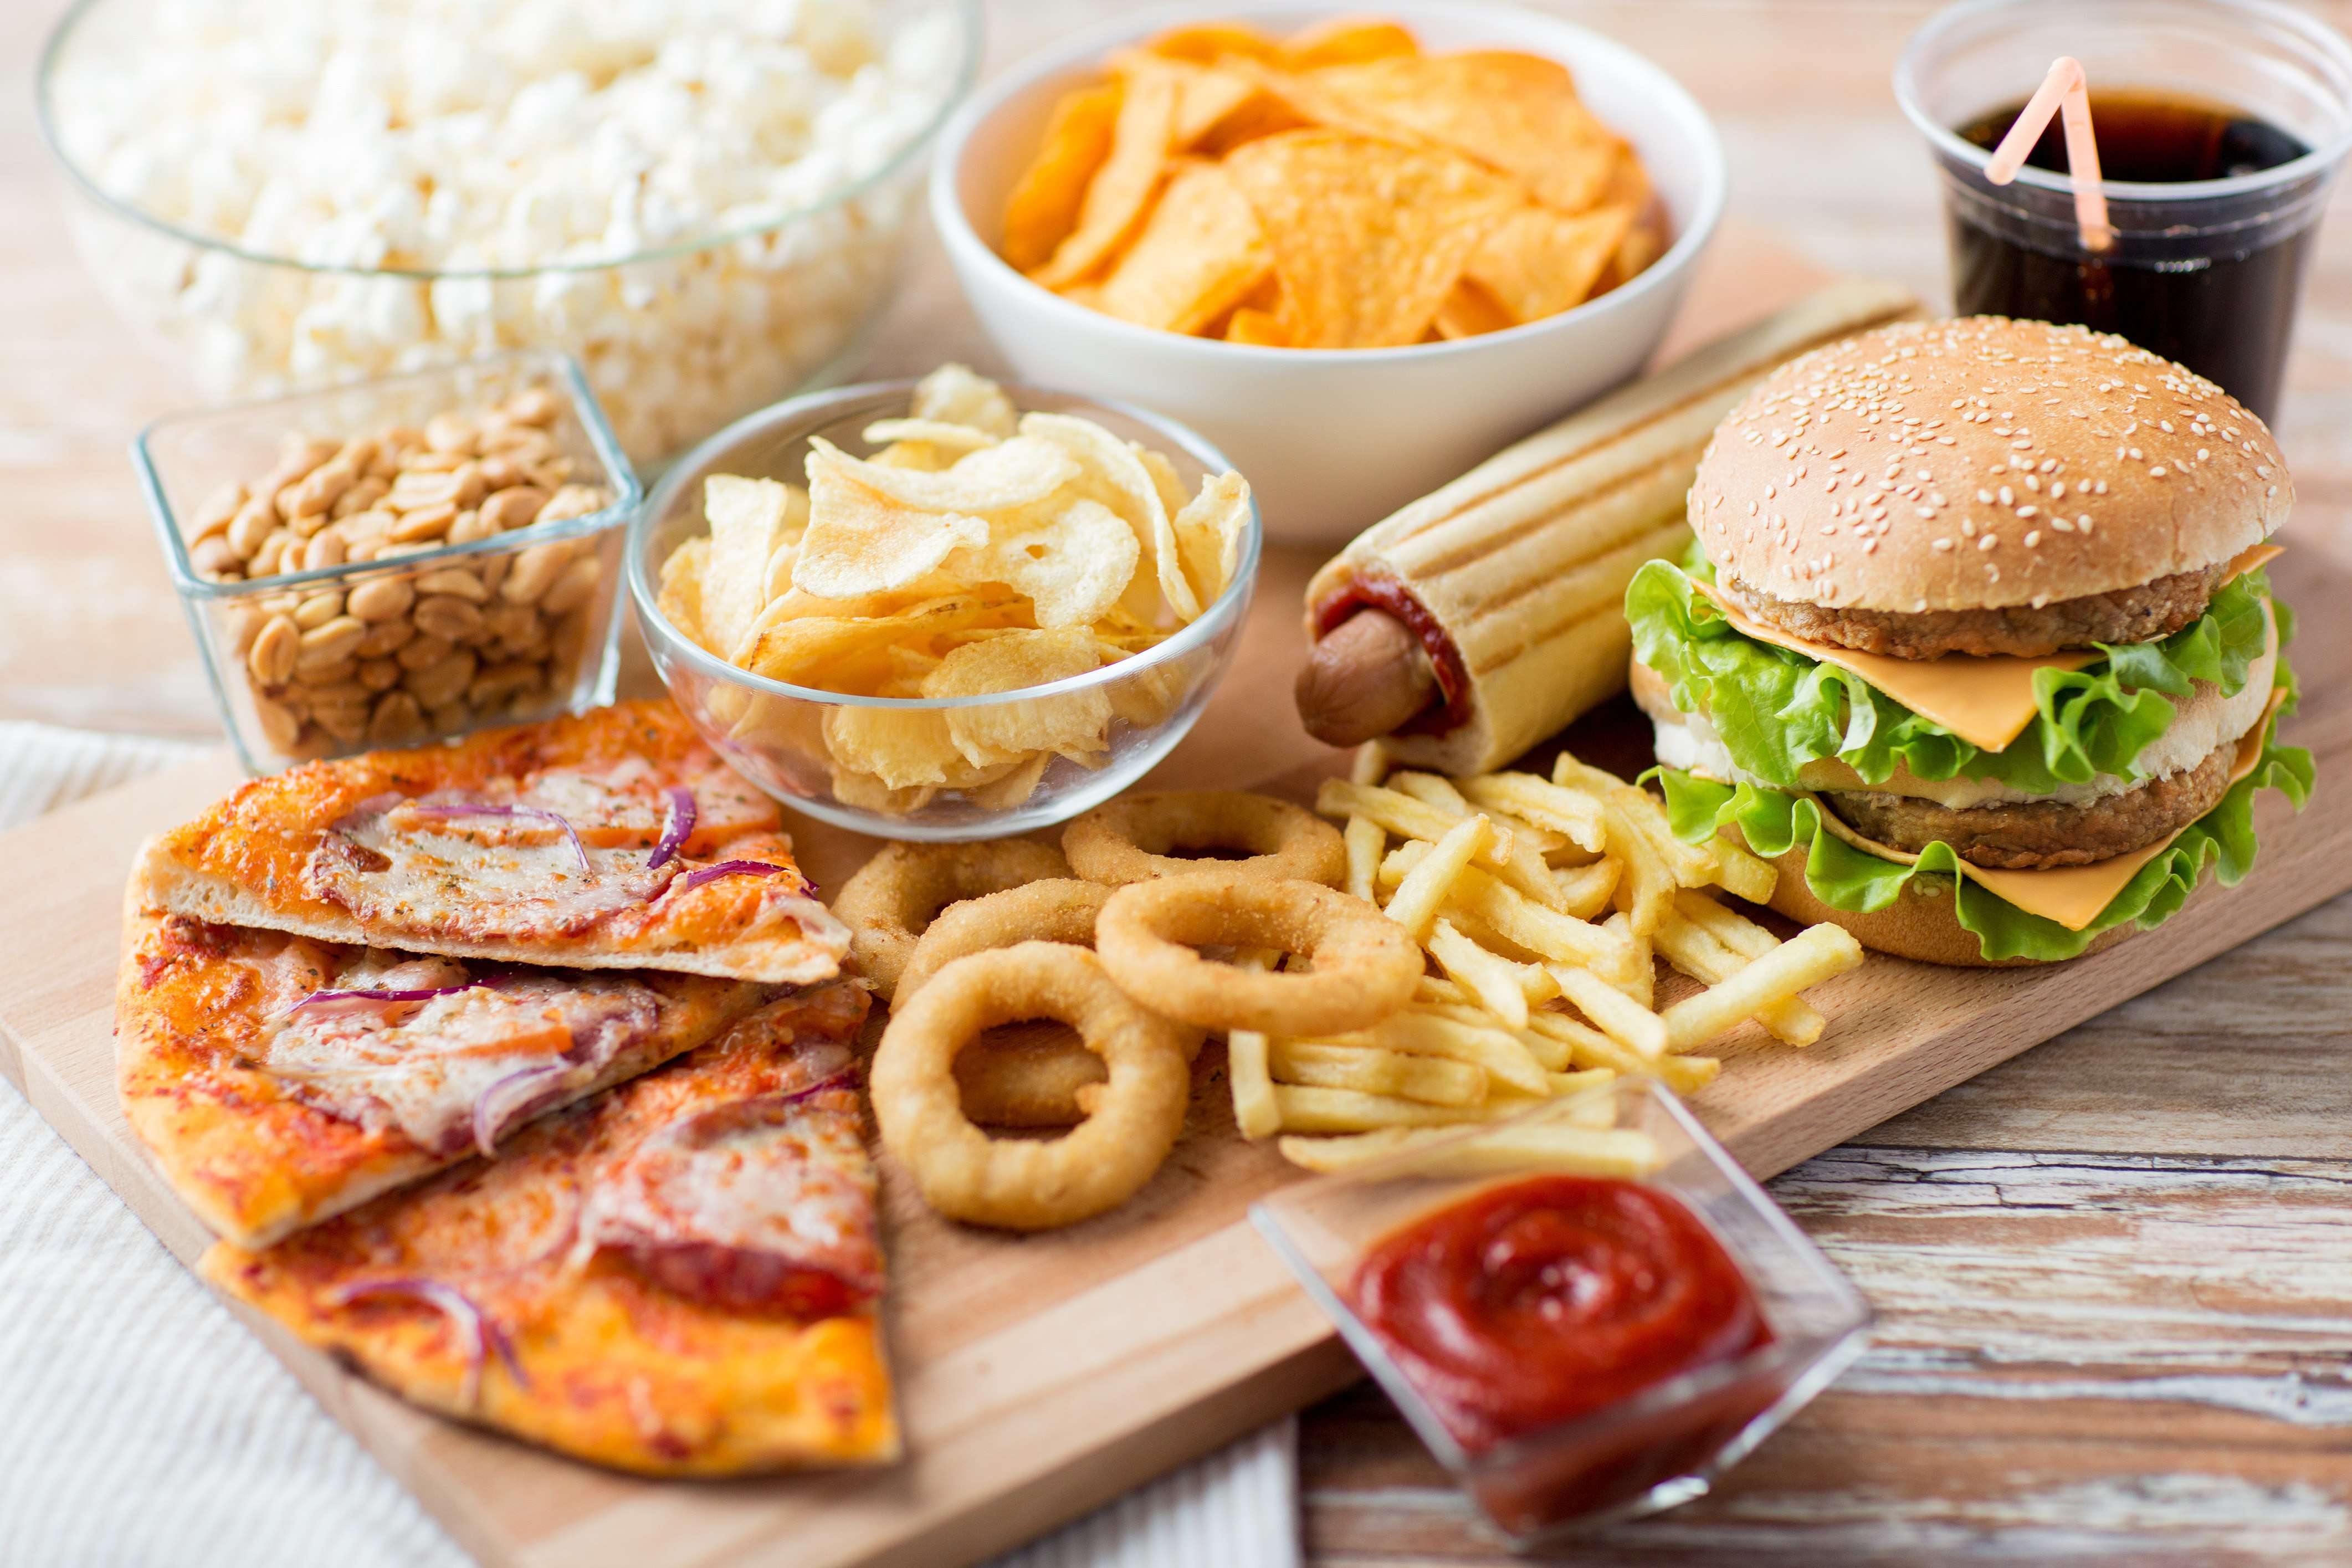 Processed foods can increase the risk of autism